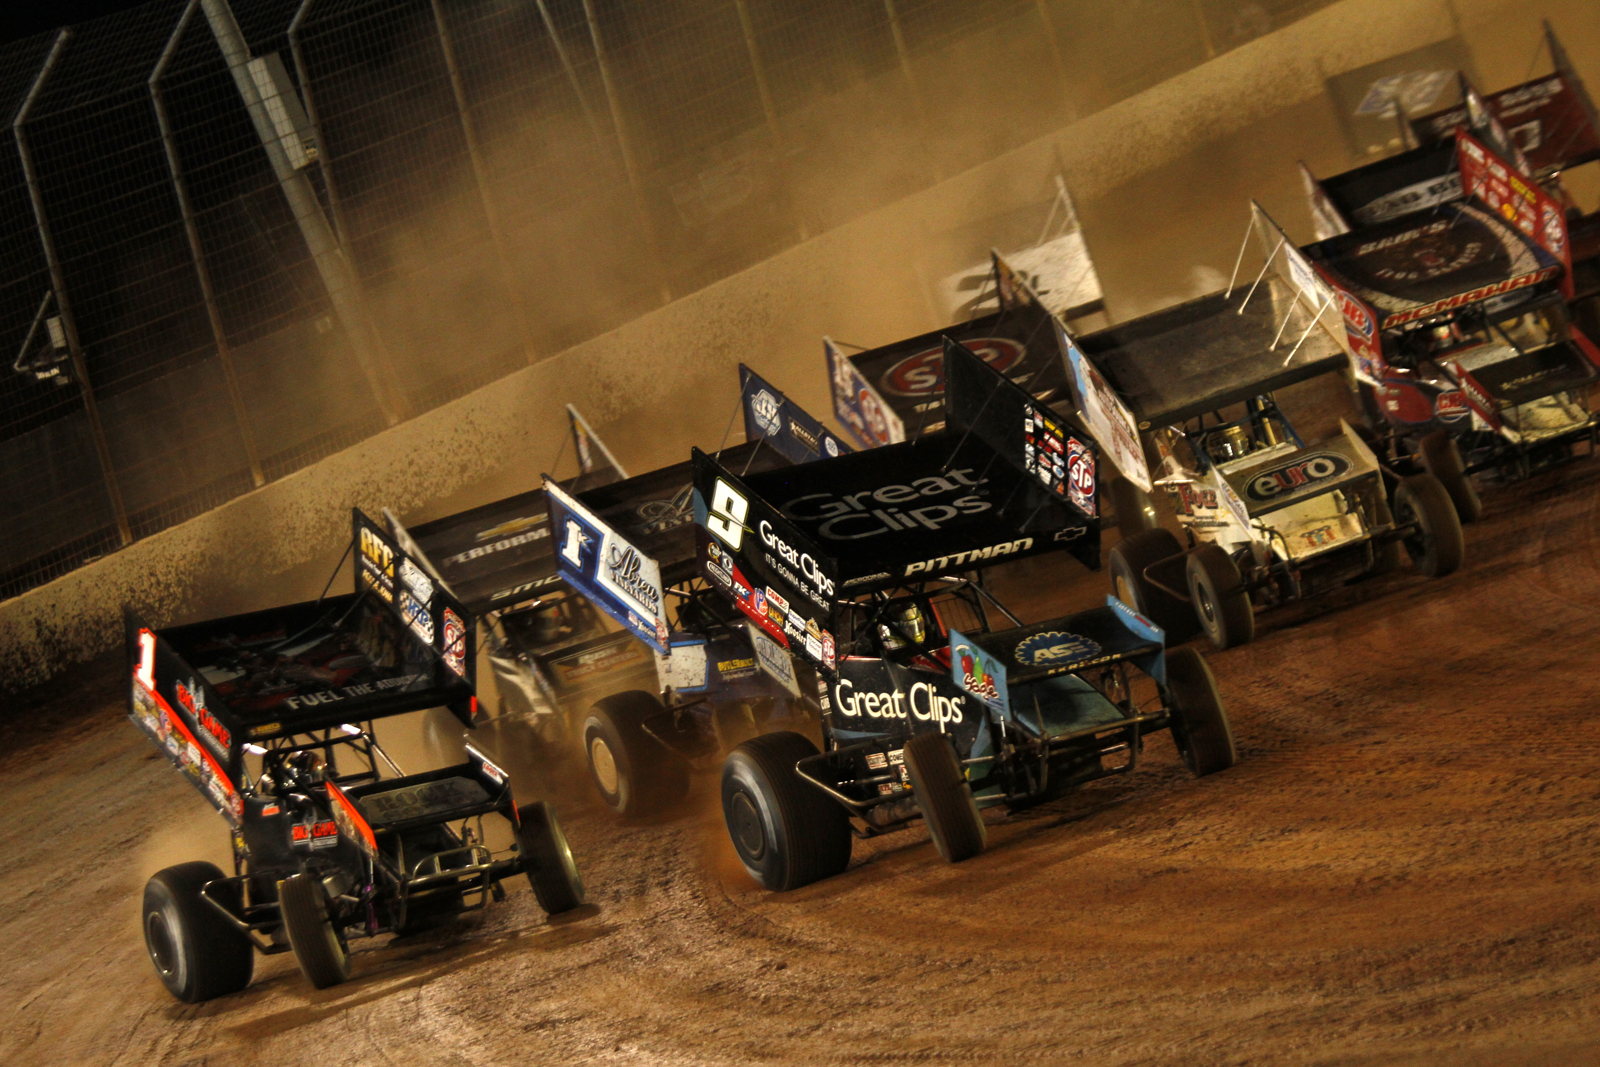 Gallery For Gt World Of Outlaws Sprint Car Wallpaper